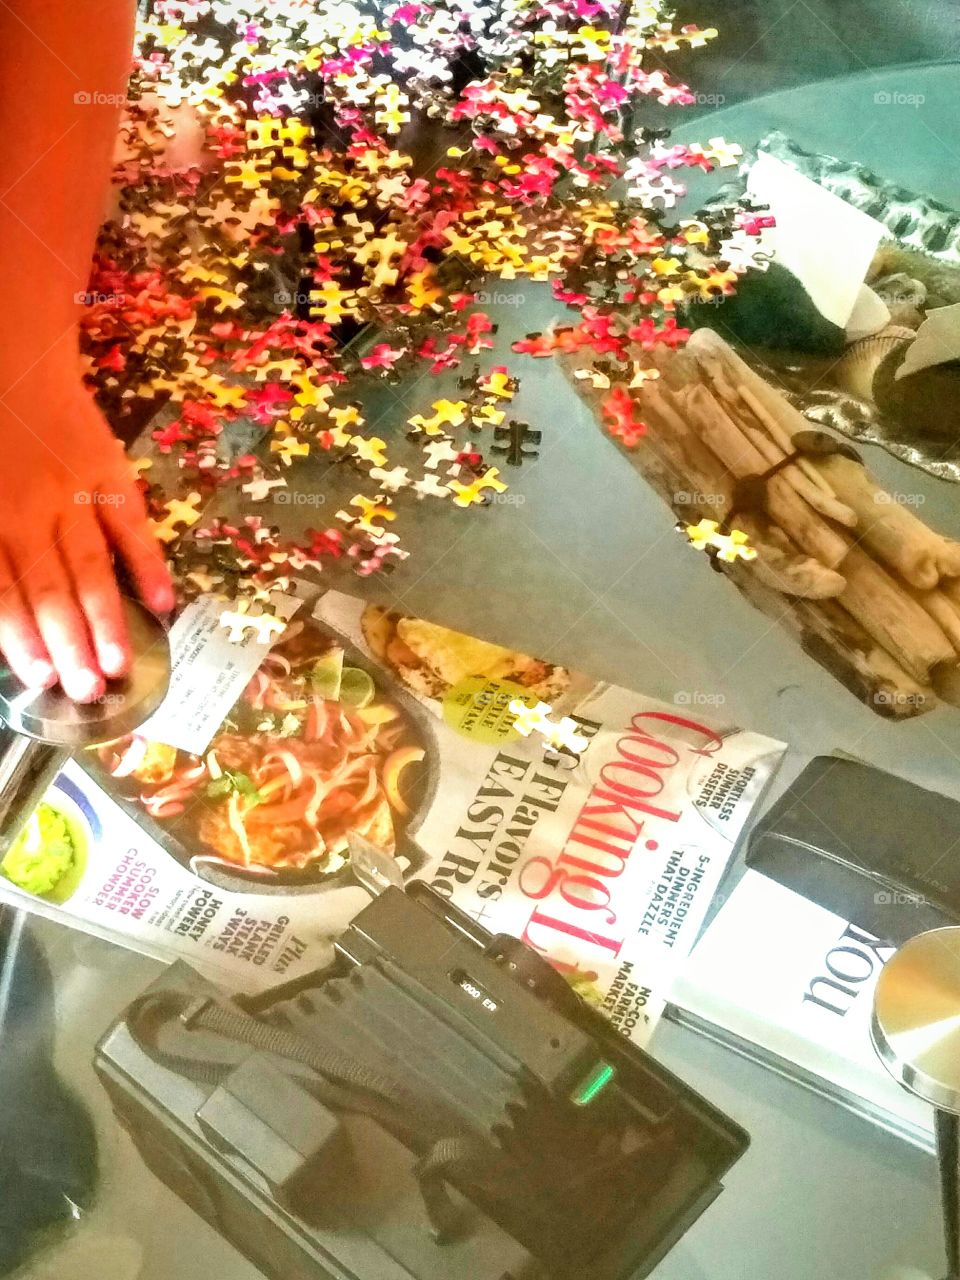 Putting puzzle together